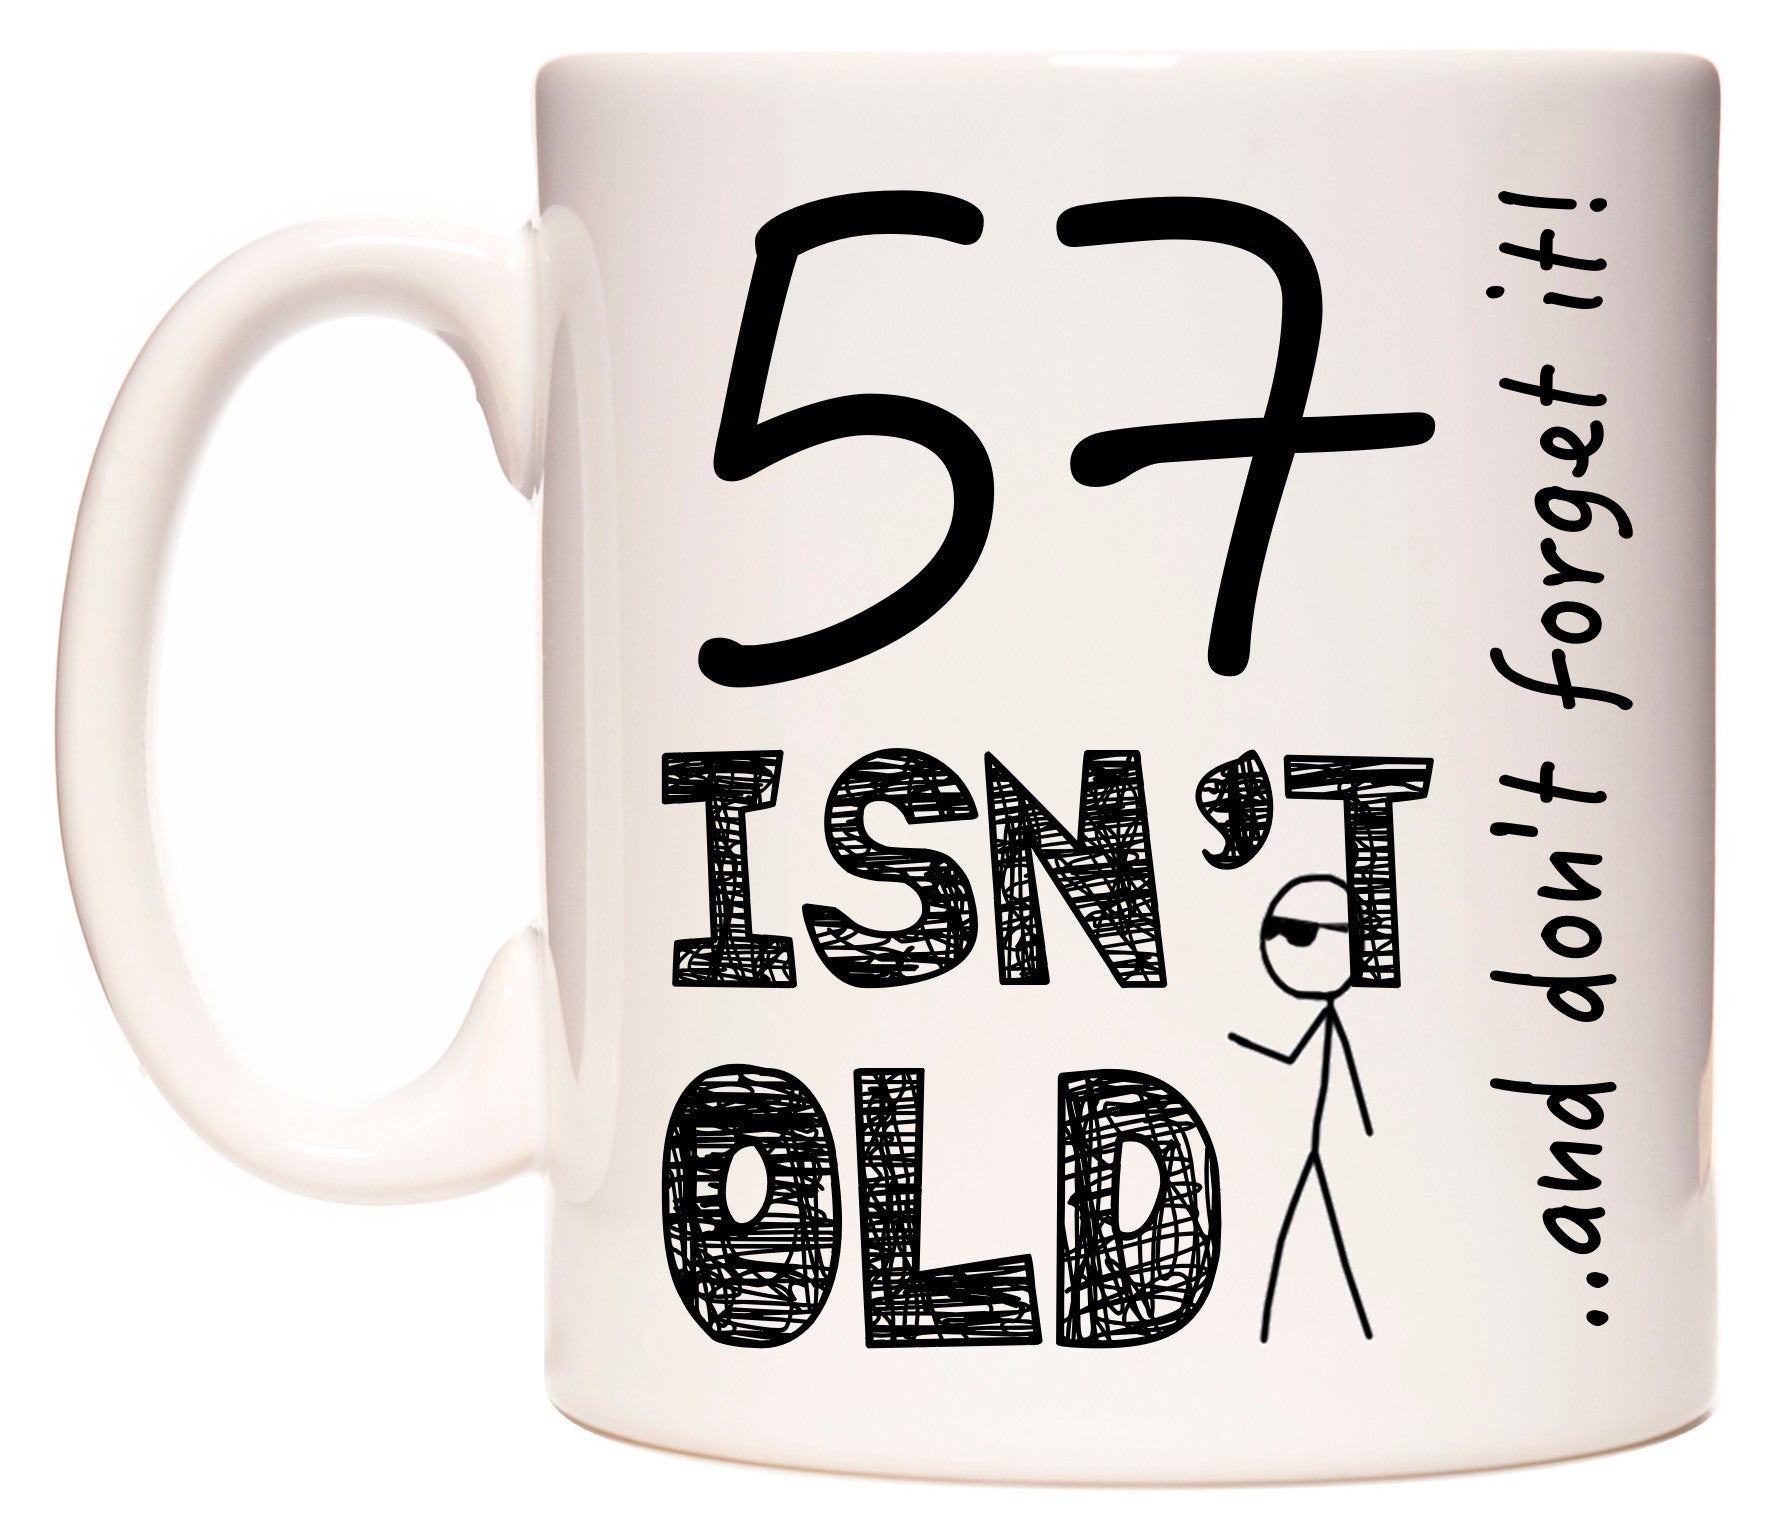 This mug features 57 Isn't Old